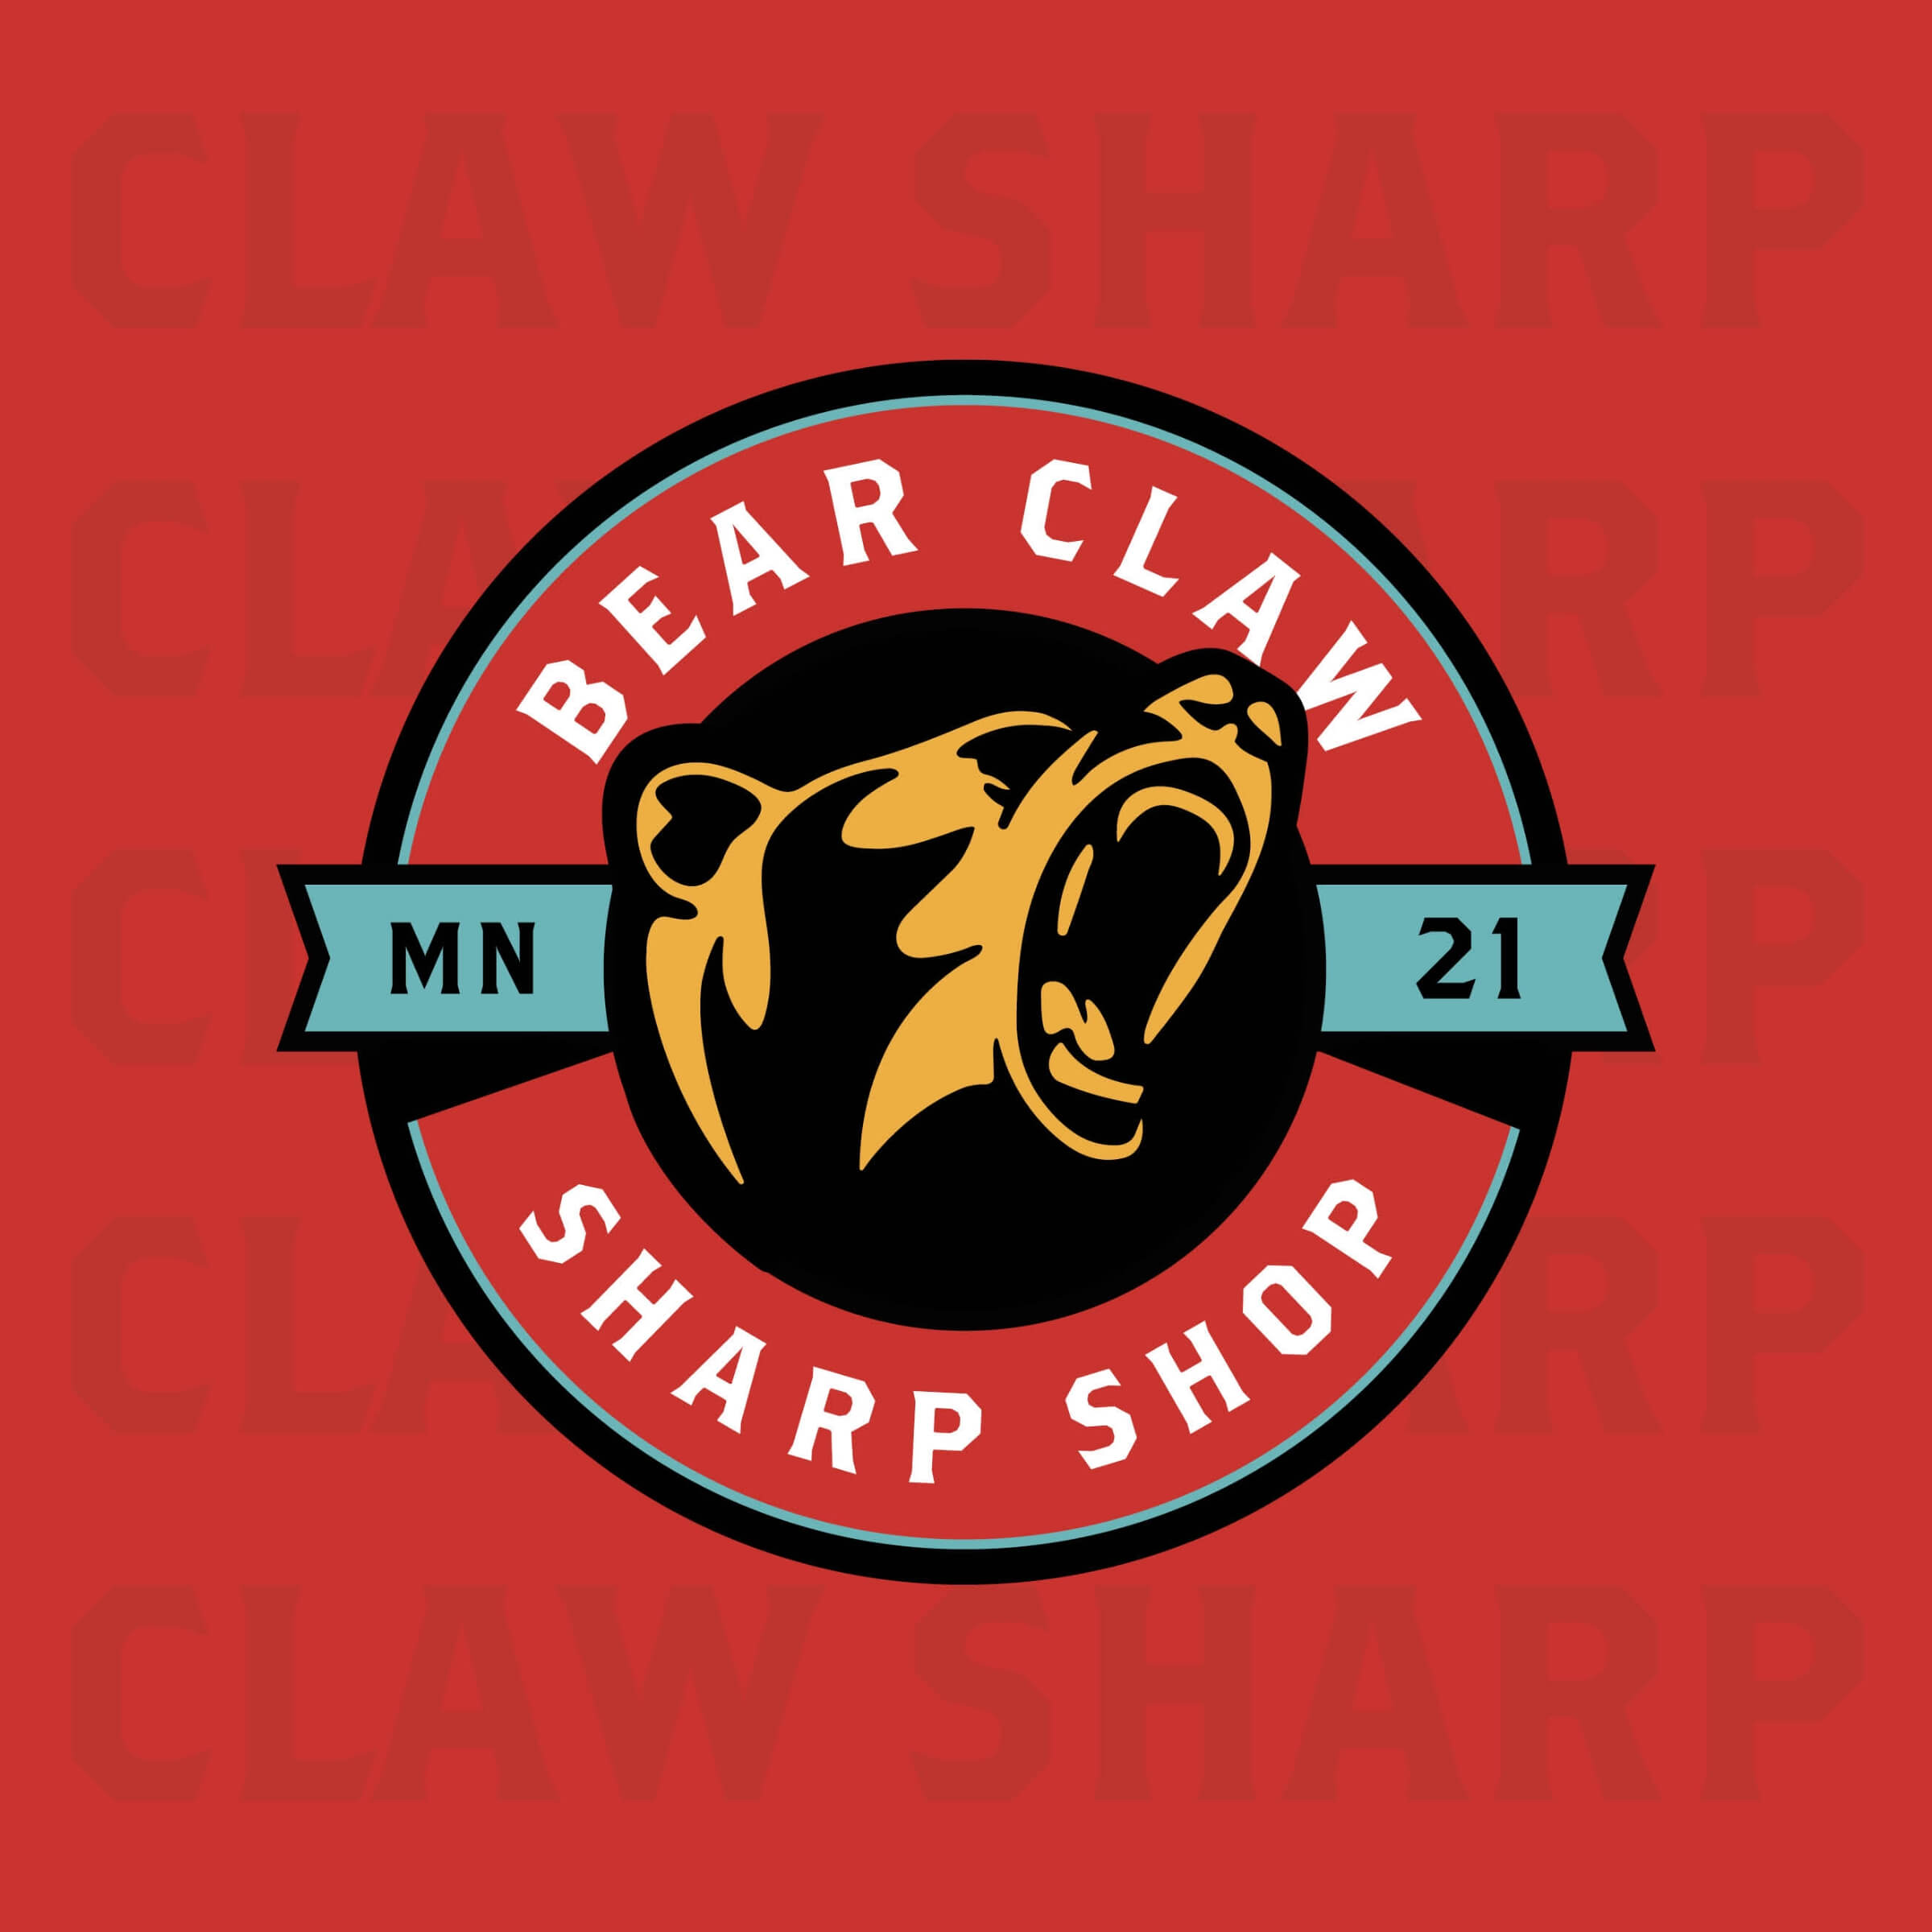 The Bear Claw Sharp Shop logo on a red background.